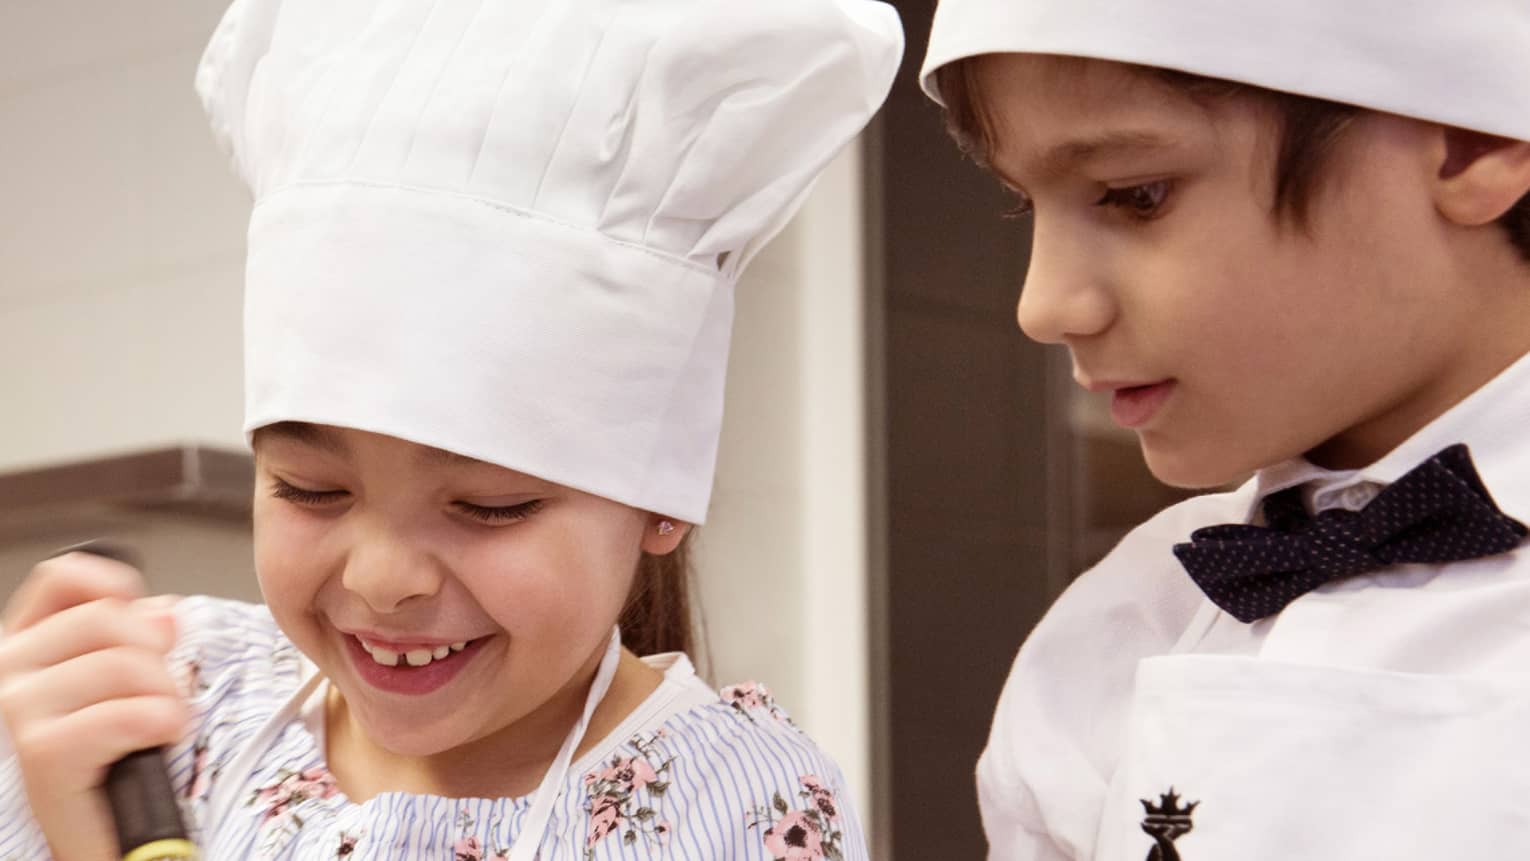 Girl and boy in chef hats; girl stirring with whisk, boy watching